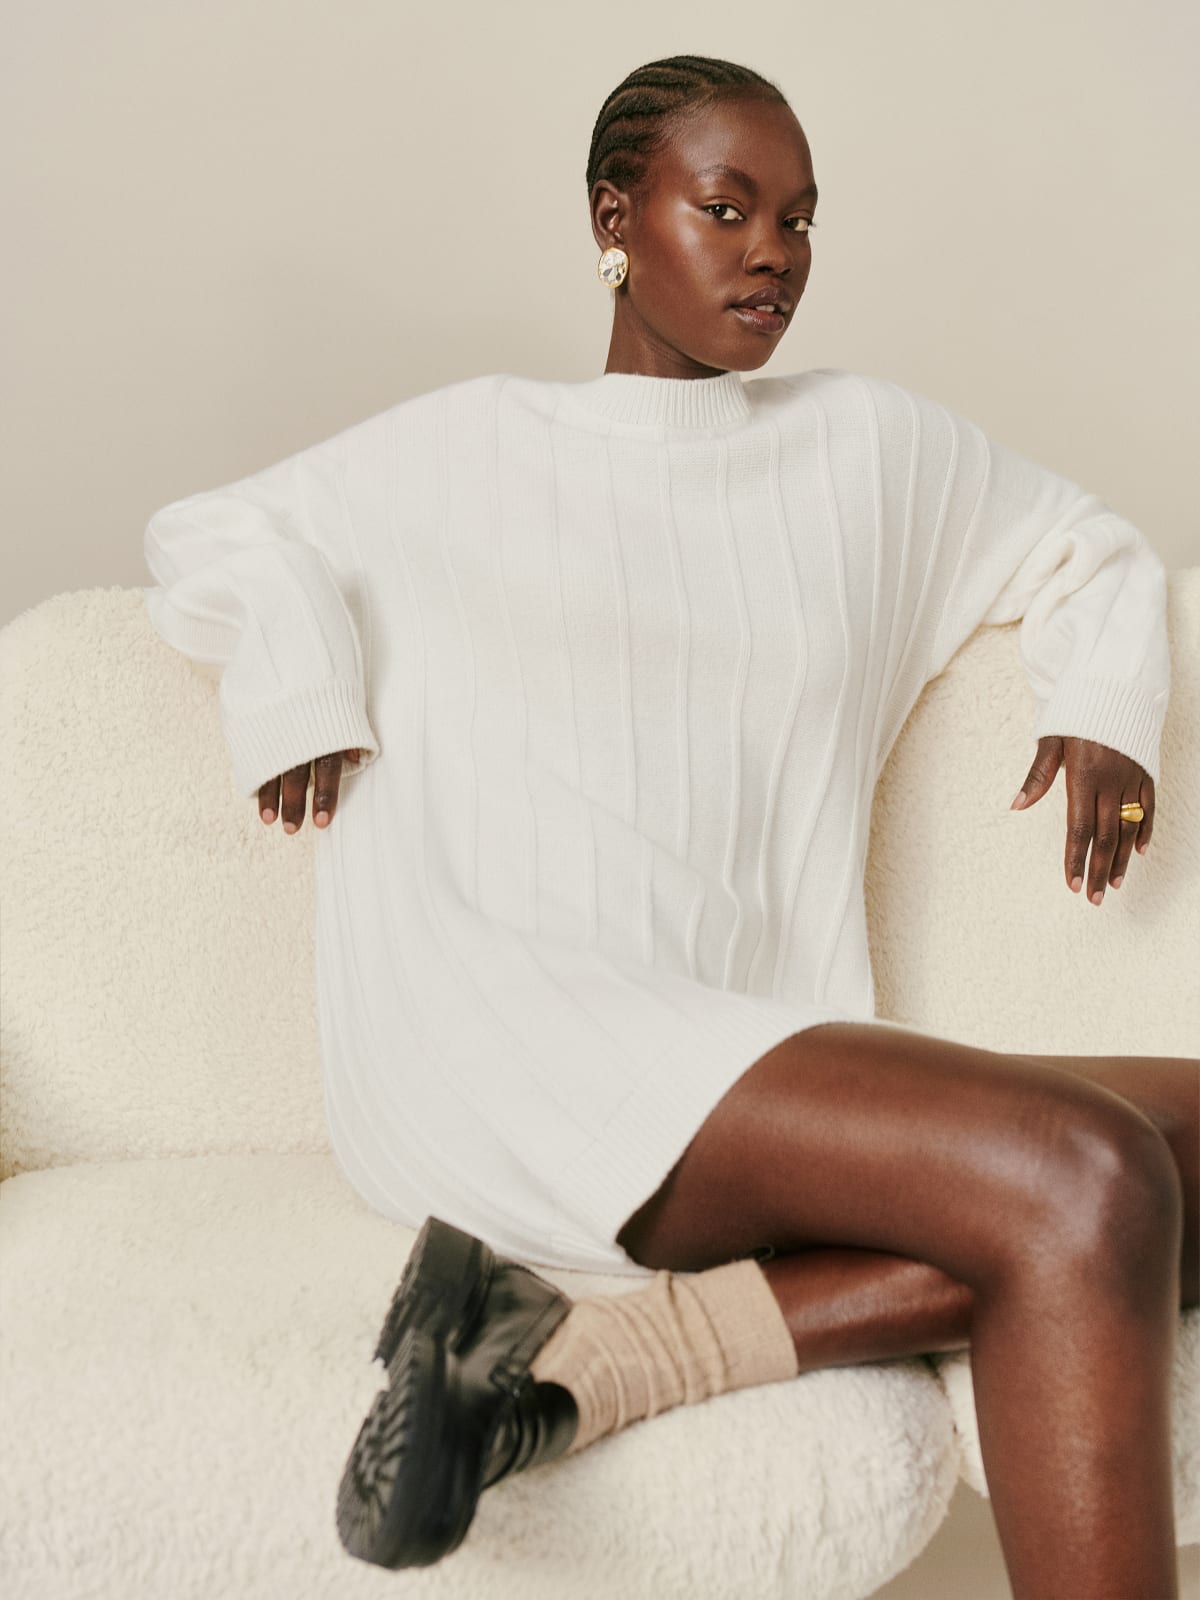 The Reformation Harriet regenerative wool mini dress is a long sleeve, mini, sweater dress in a relaxed fit in cream and ribbed detailing throughout and a round neck. 